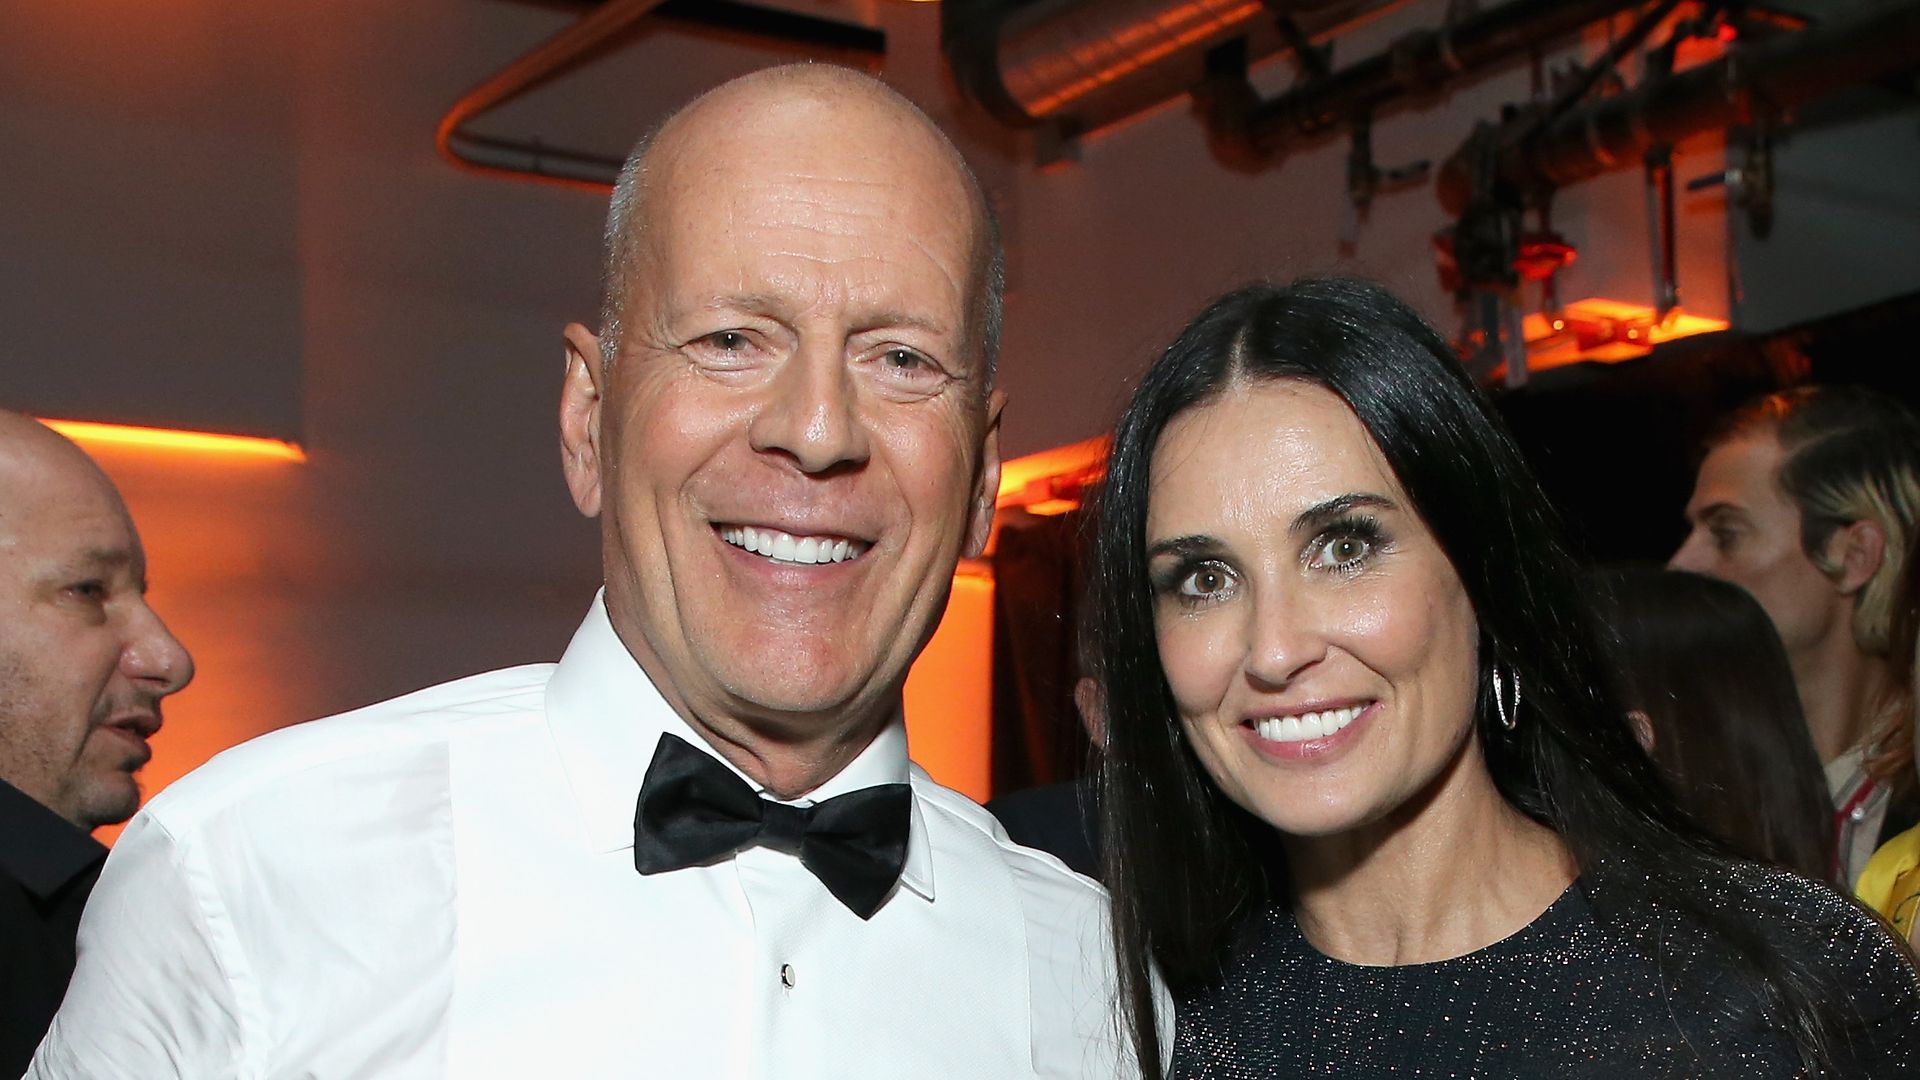 Bruce Willis and Demi Moore attend the after party for the Comedy Central Roast of Bruce Willis at NeueHouse on July 14, 2018 in Los Angeles, California.